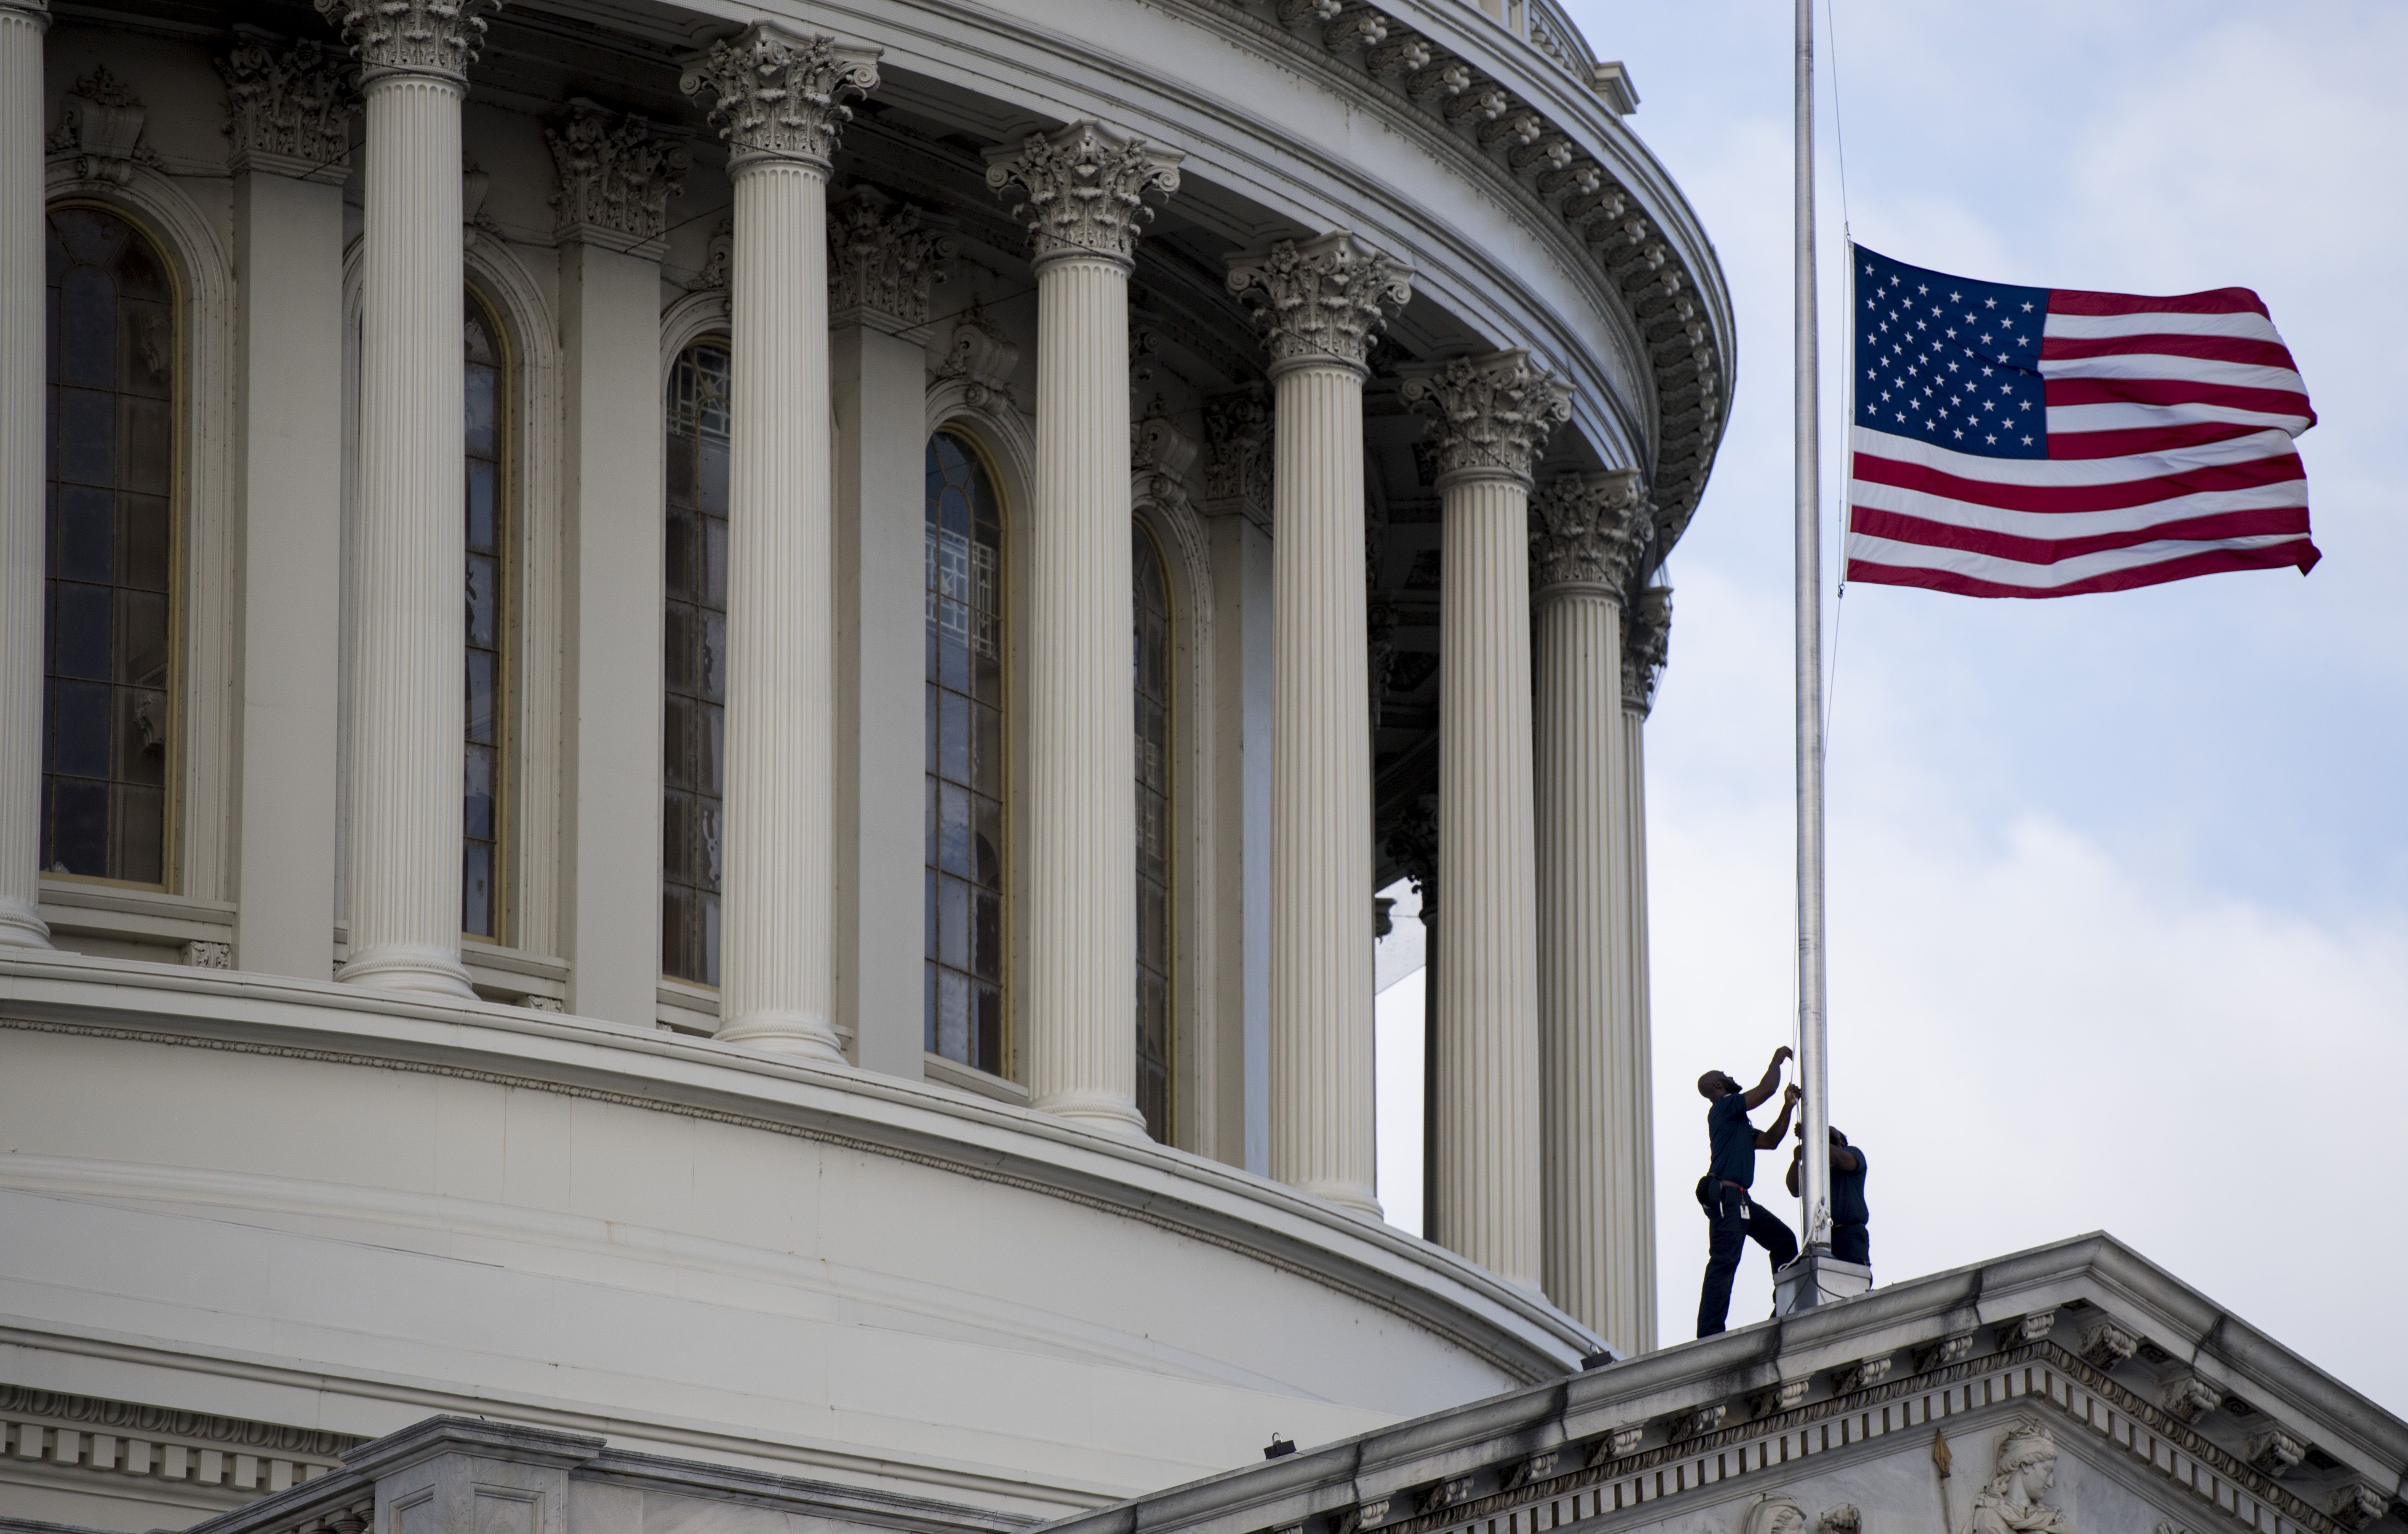 Capitol workers lower the flag to half staff after the passing of Cummings.